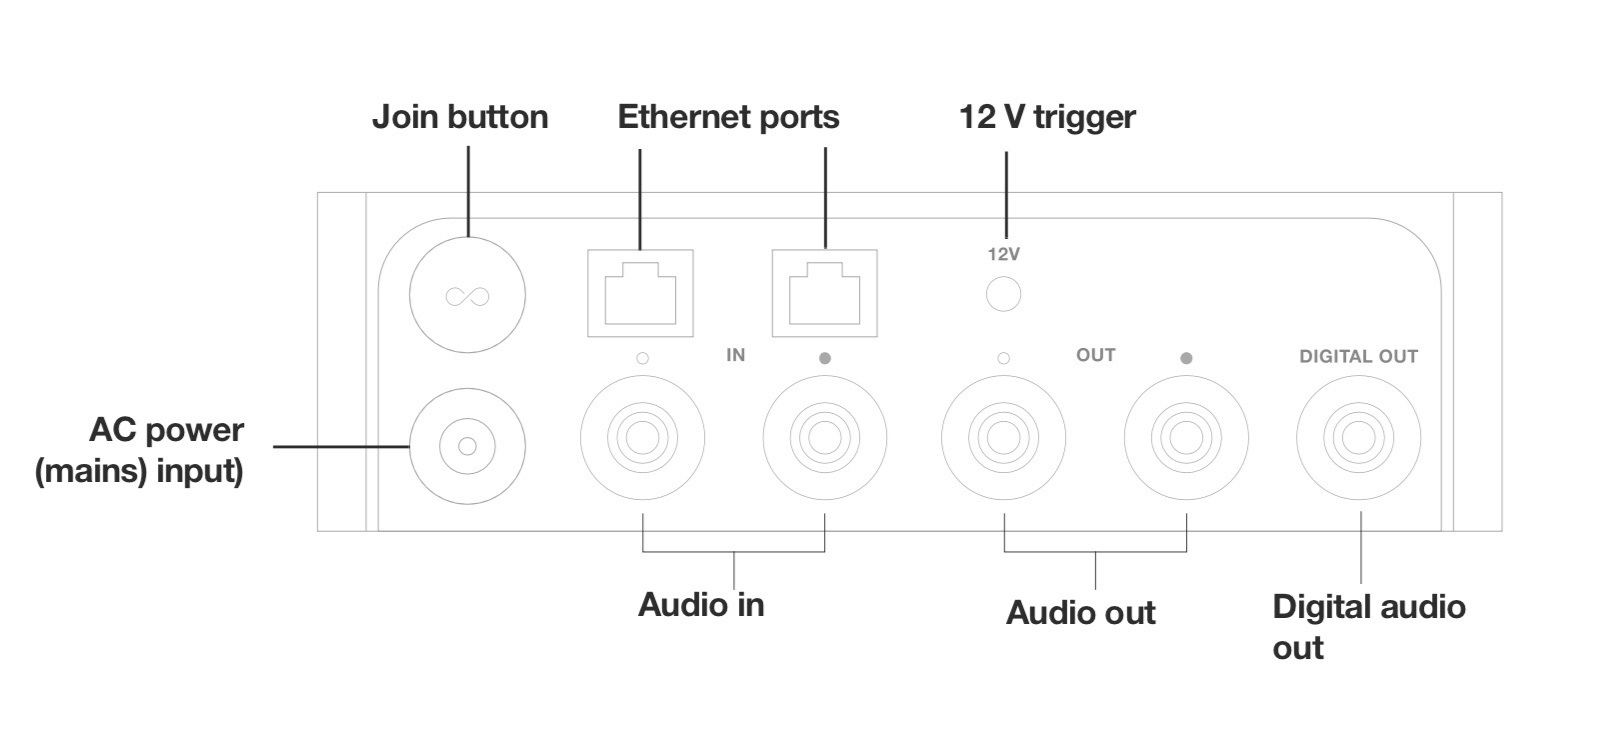 Play line in from Sonos port A, to Sonos port A and Sonos port B outputs | Sonos Community